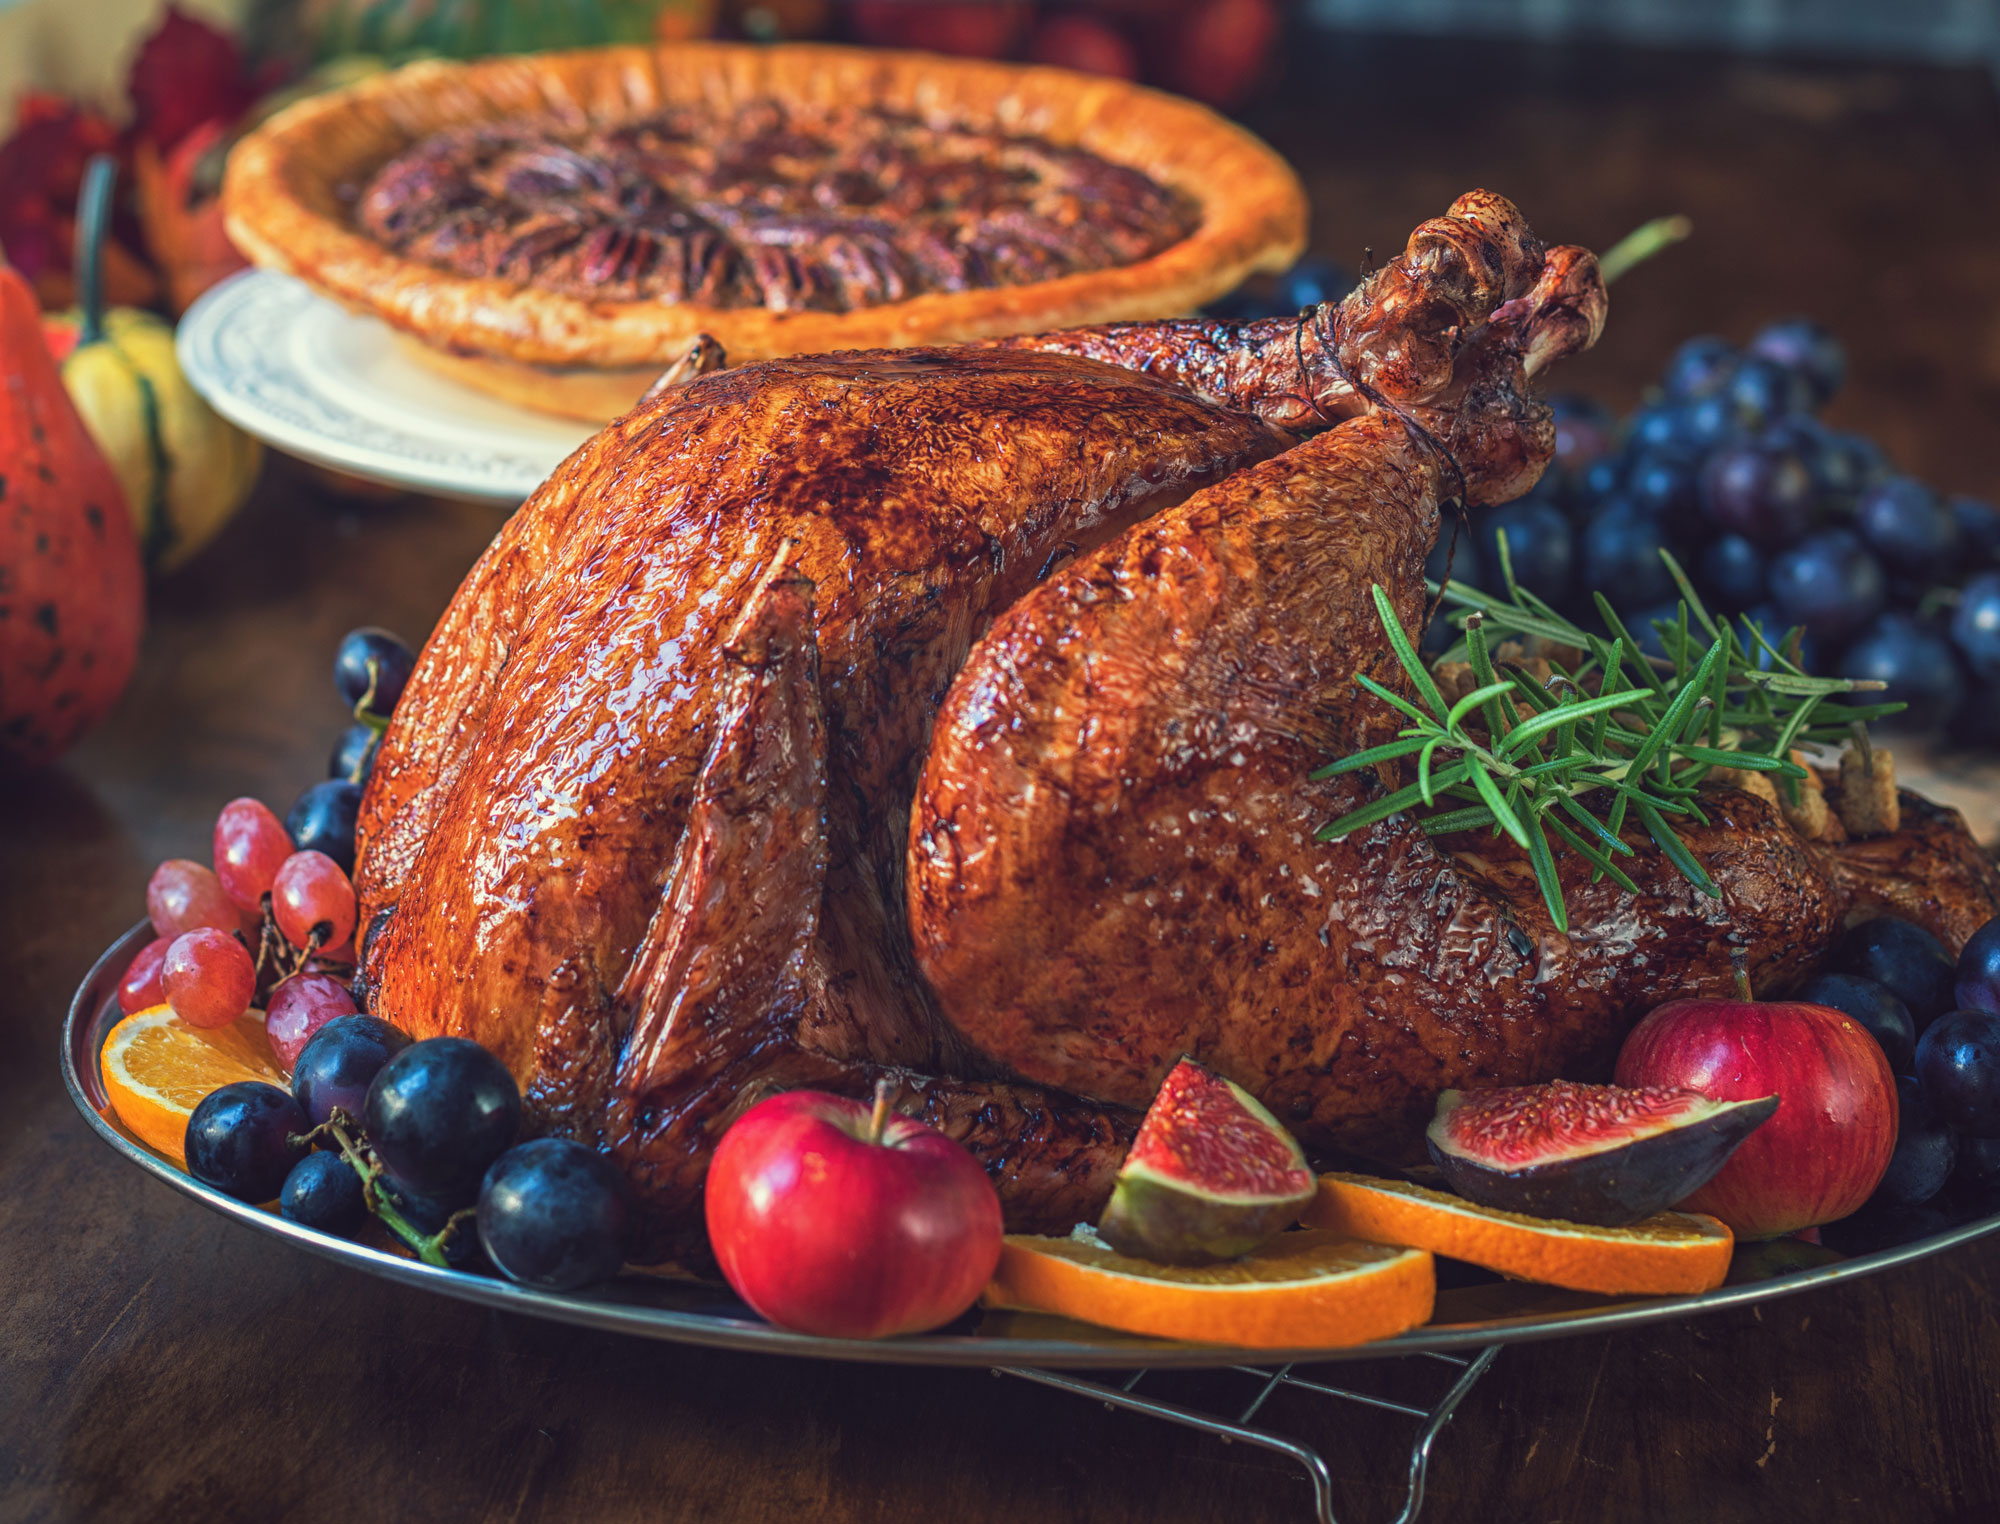 Real-time turkey: using a thermometer to ensure safety